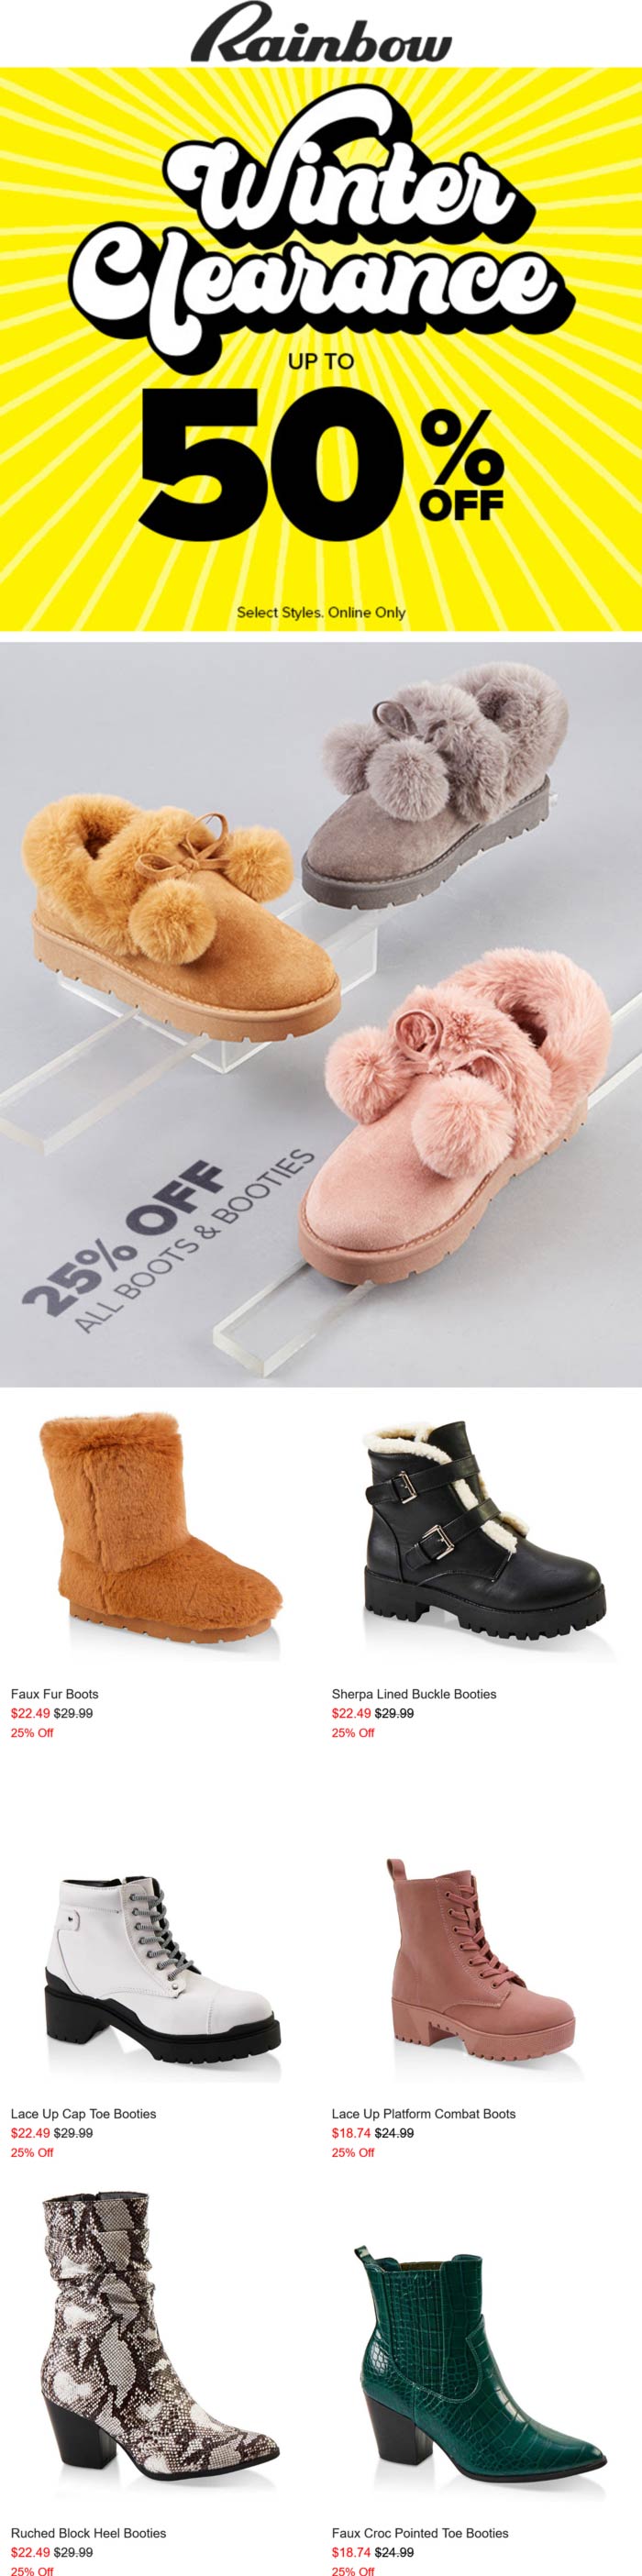 Rainbow stores Coupon  25% off all boots & more at Rainbow shops #rainbow 